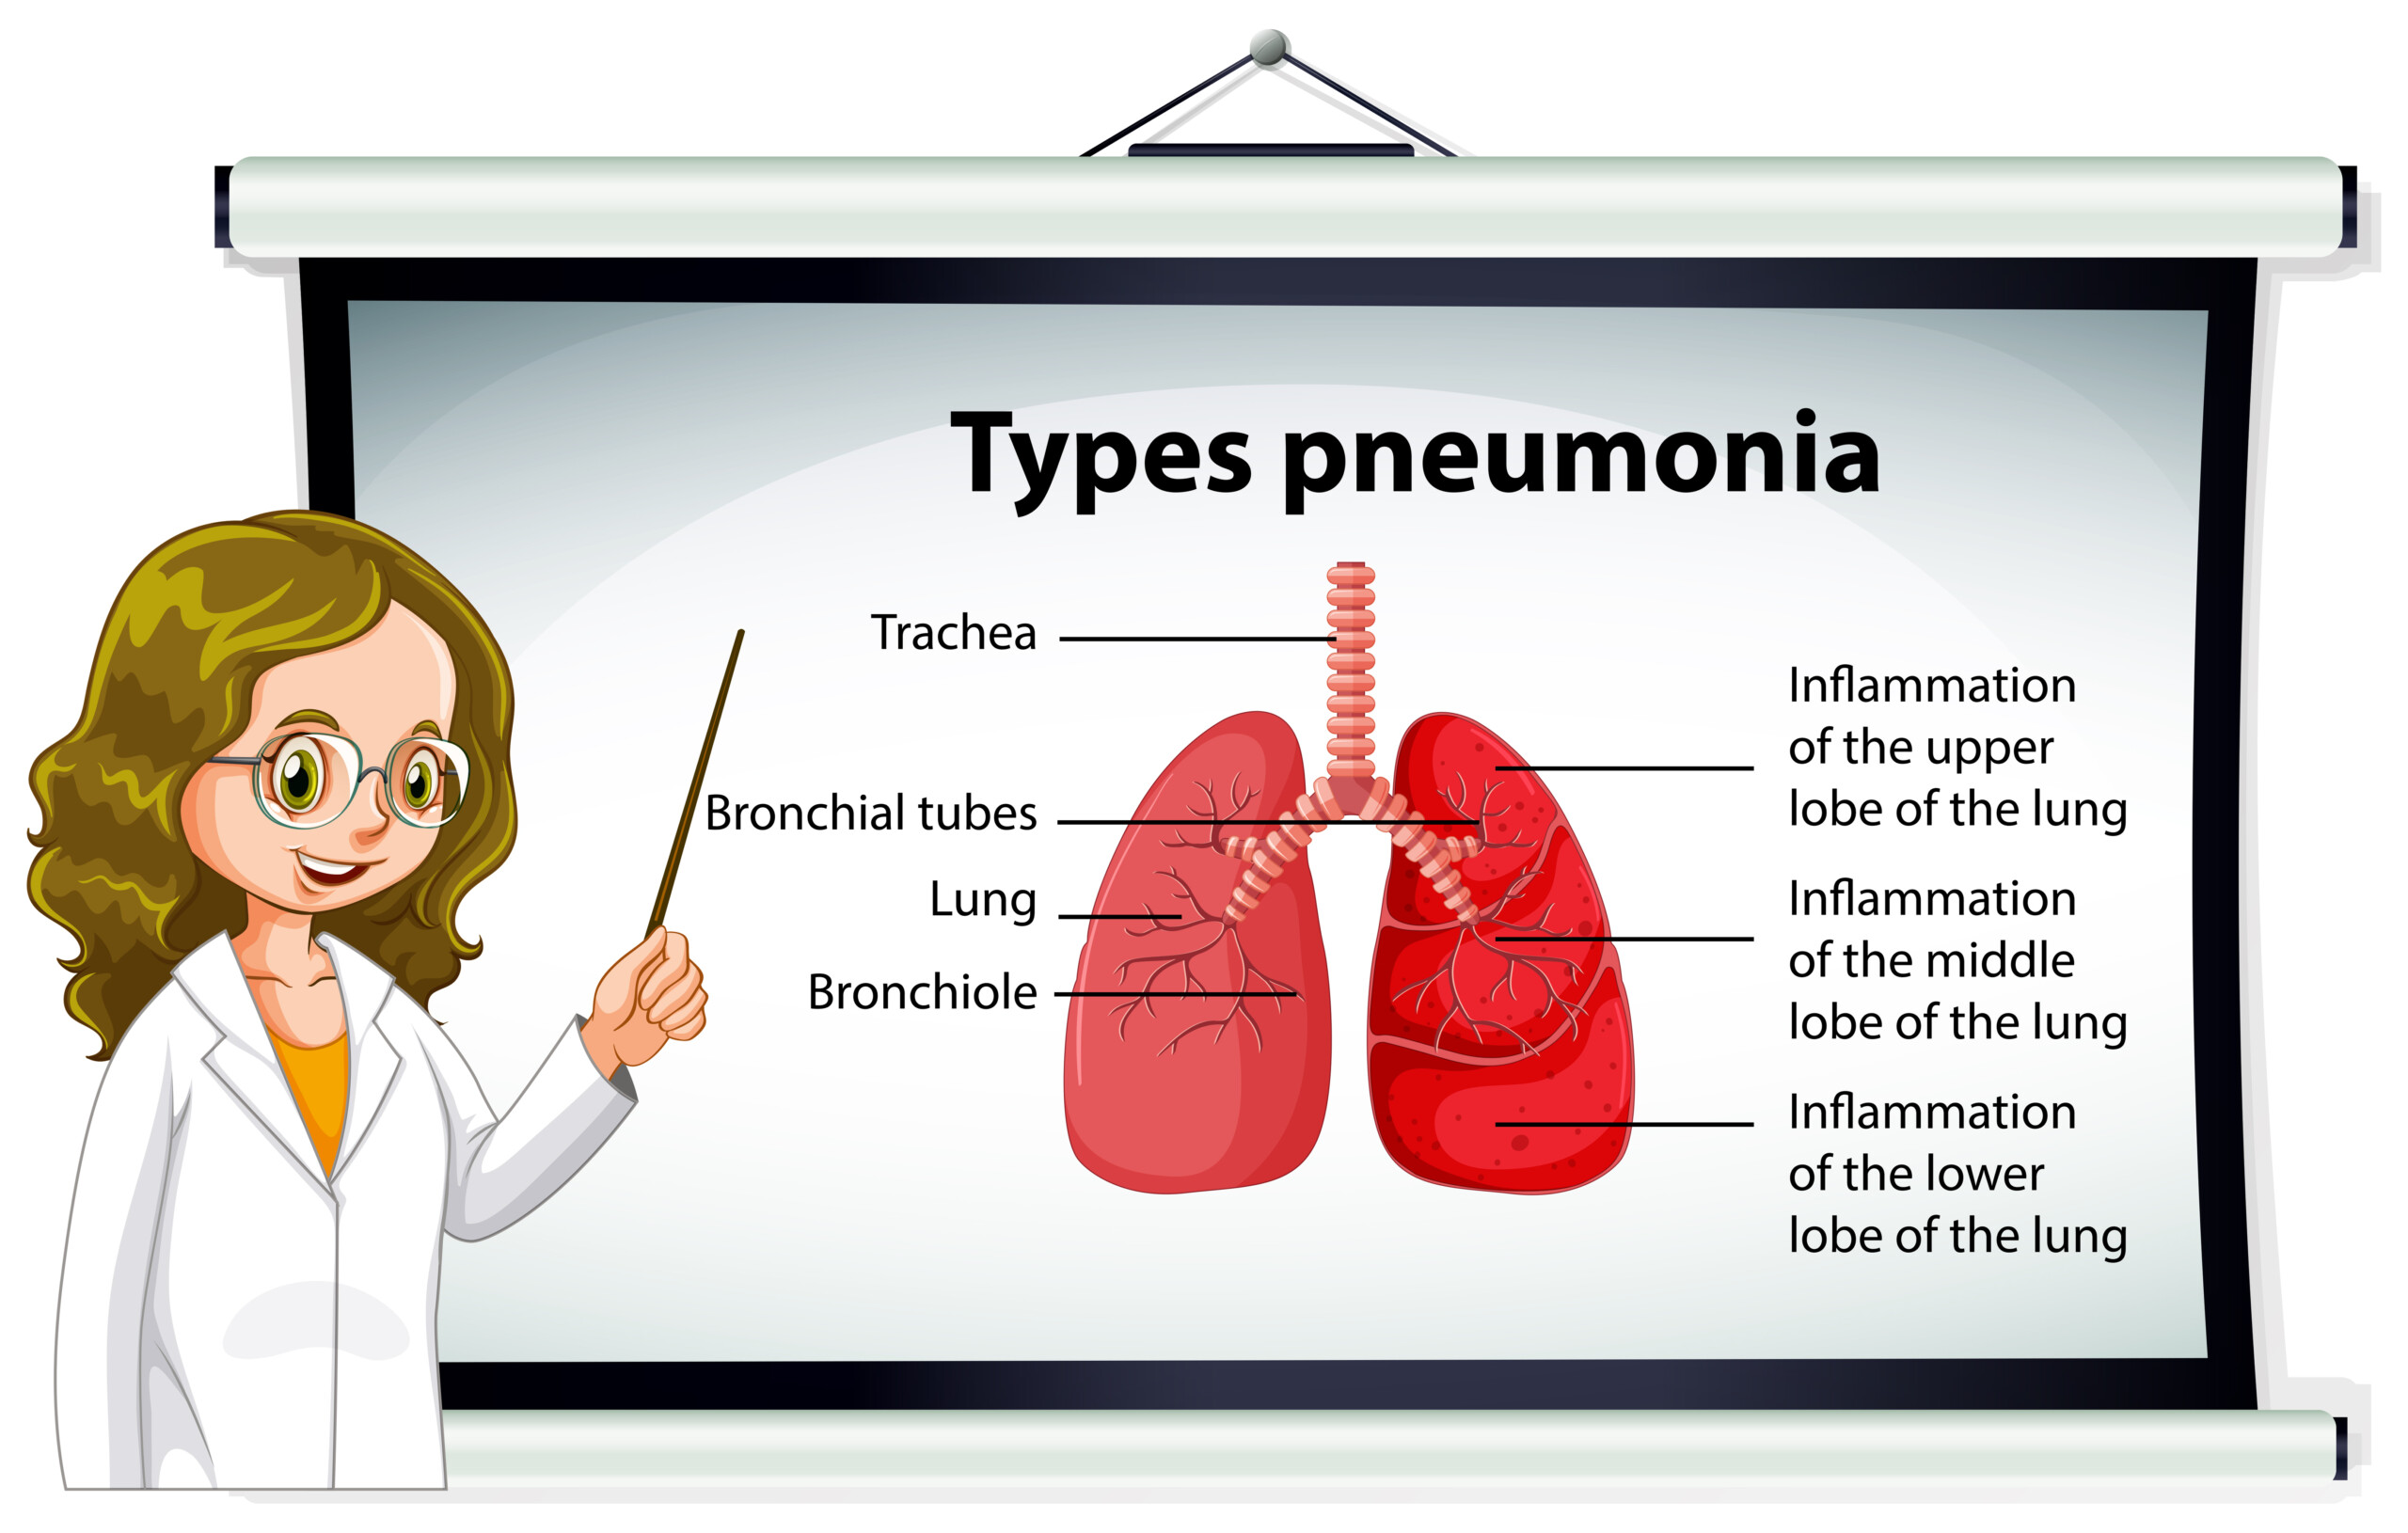 Can Non-Walking Pneumonia Go Away On Its Own?